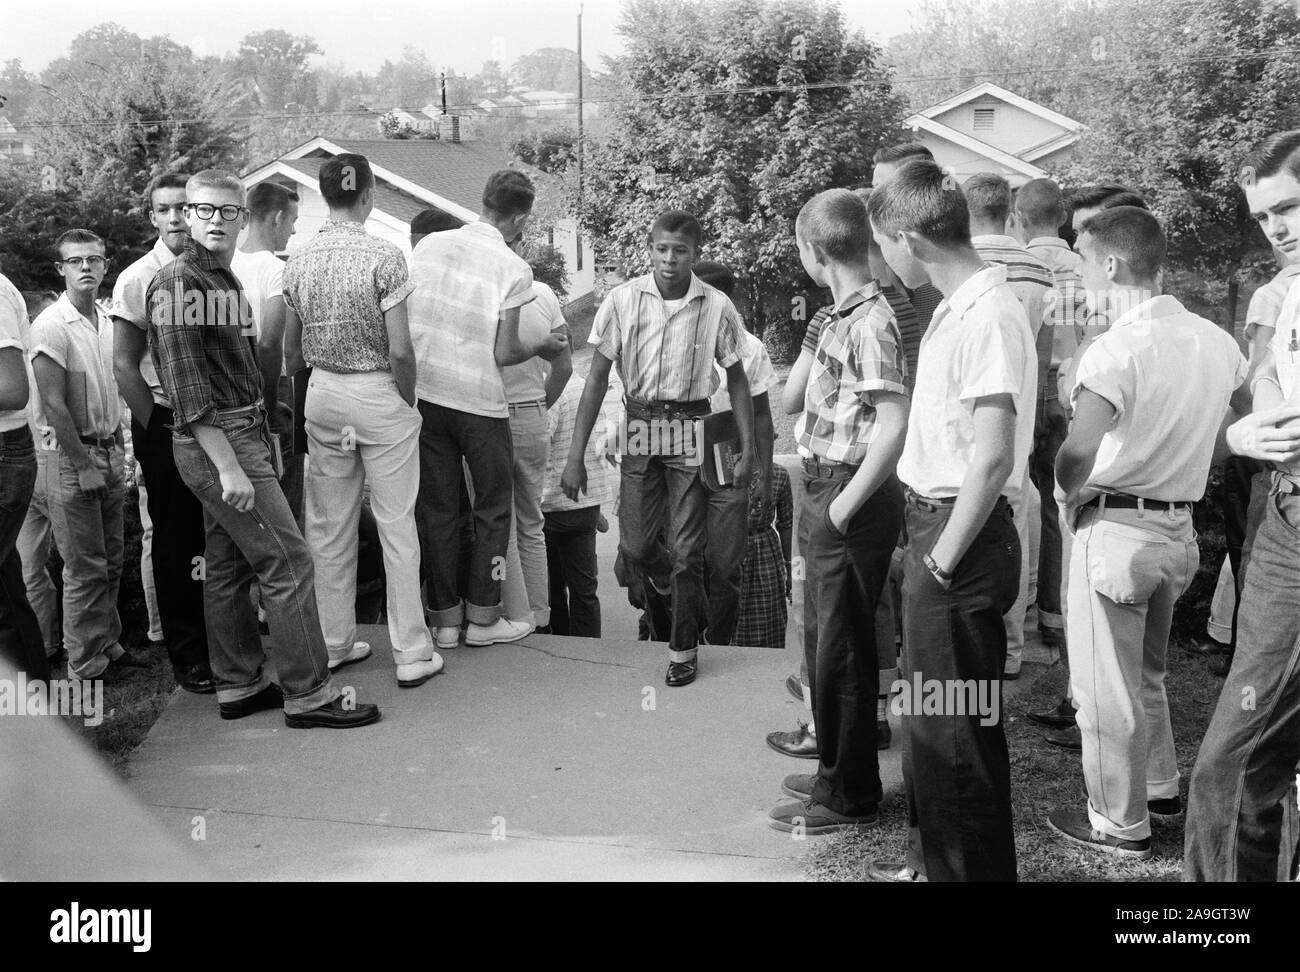 African American Boy Walking through Crowd of White Boys during Period of Violence Related to School Integration, Clinton, Tennessee, USA, photograph by Thomas J. O'Halloran, September 1956 Stock Photo